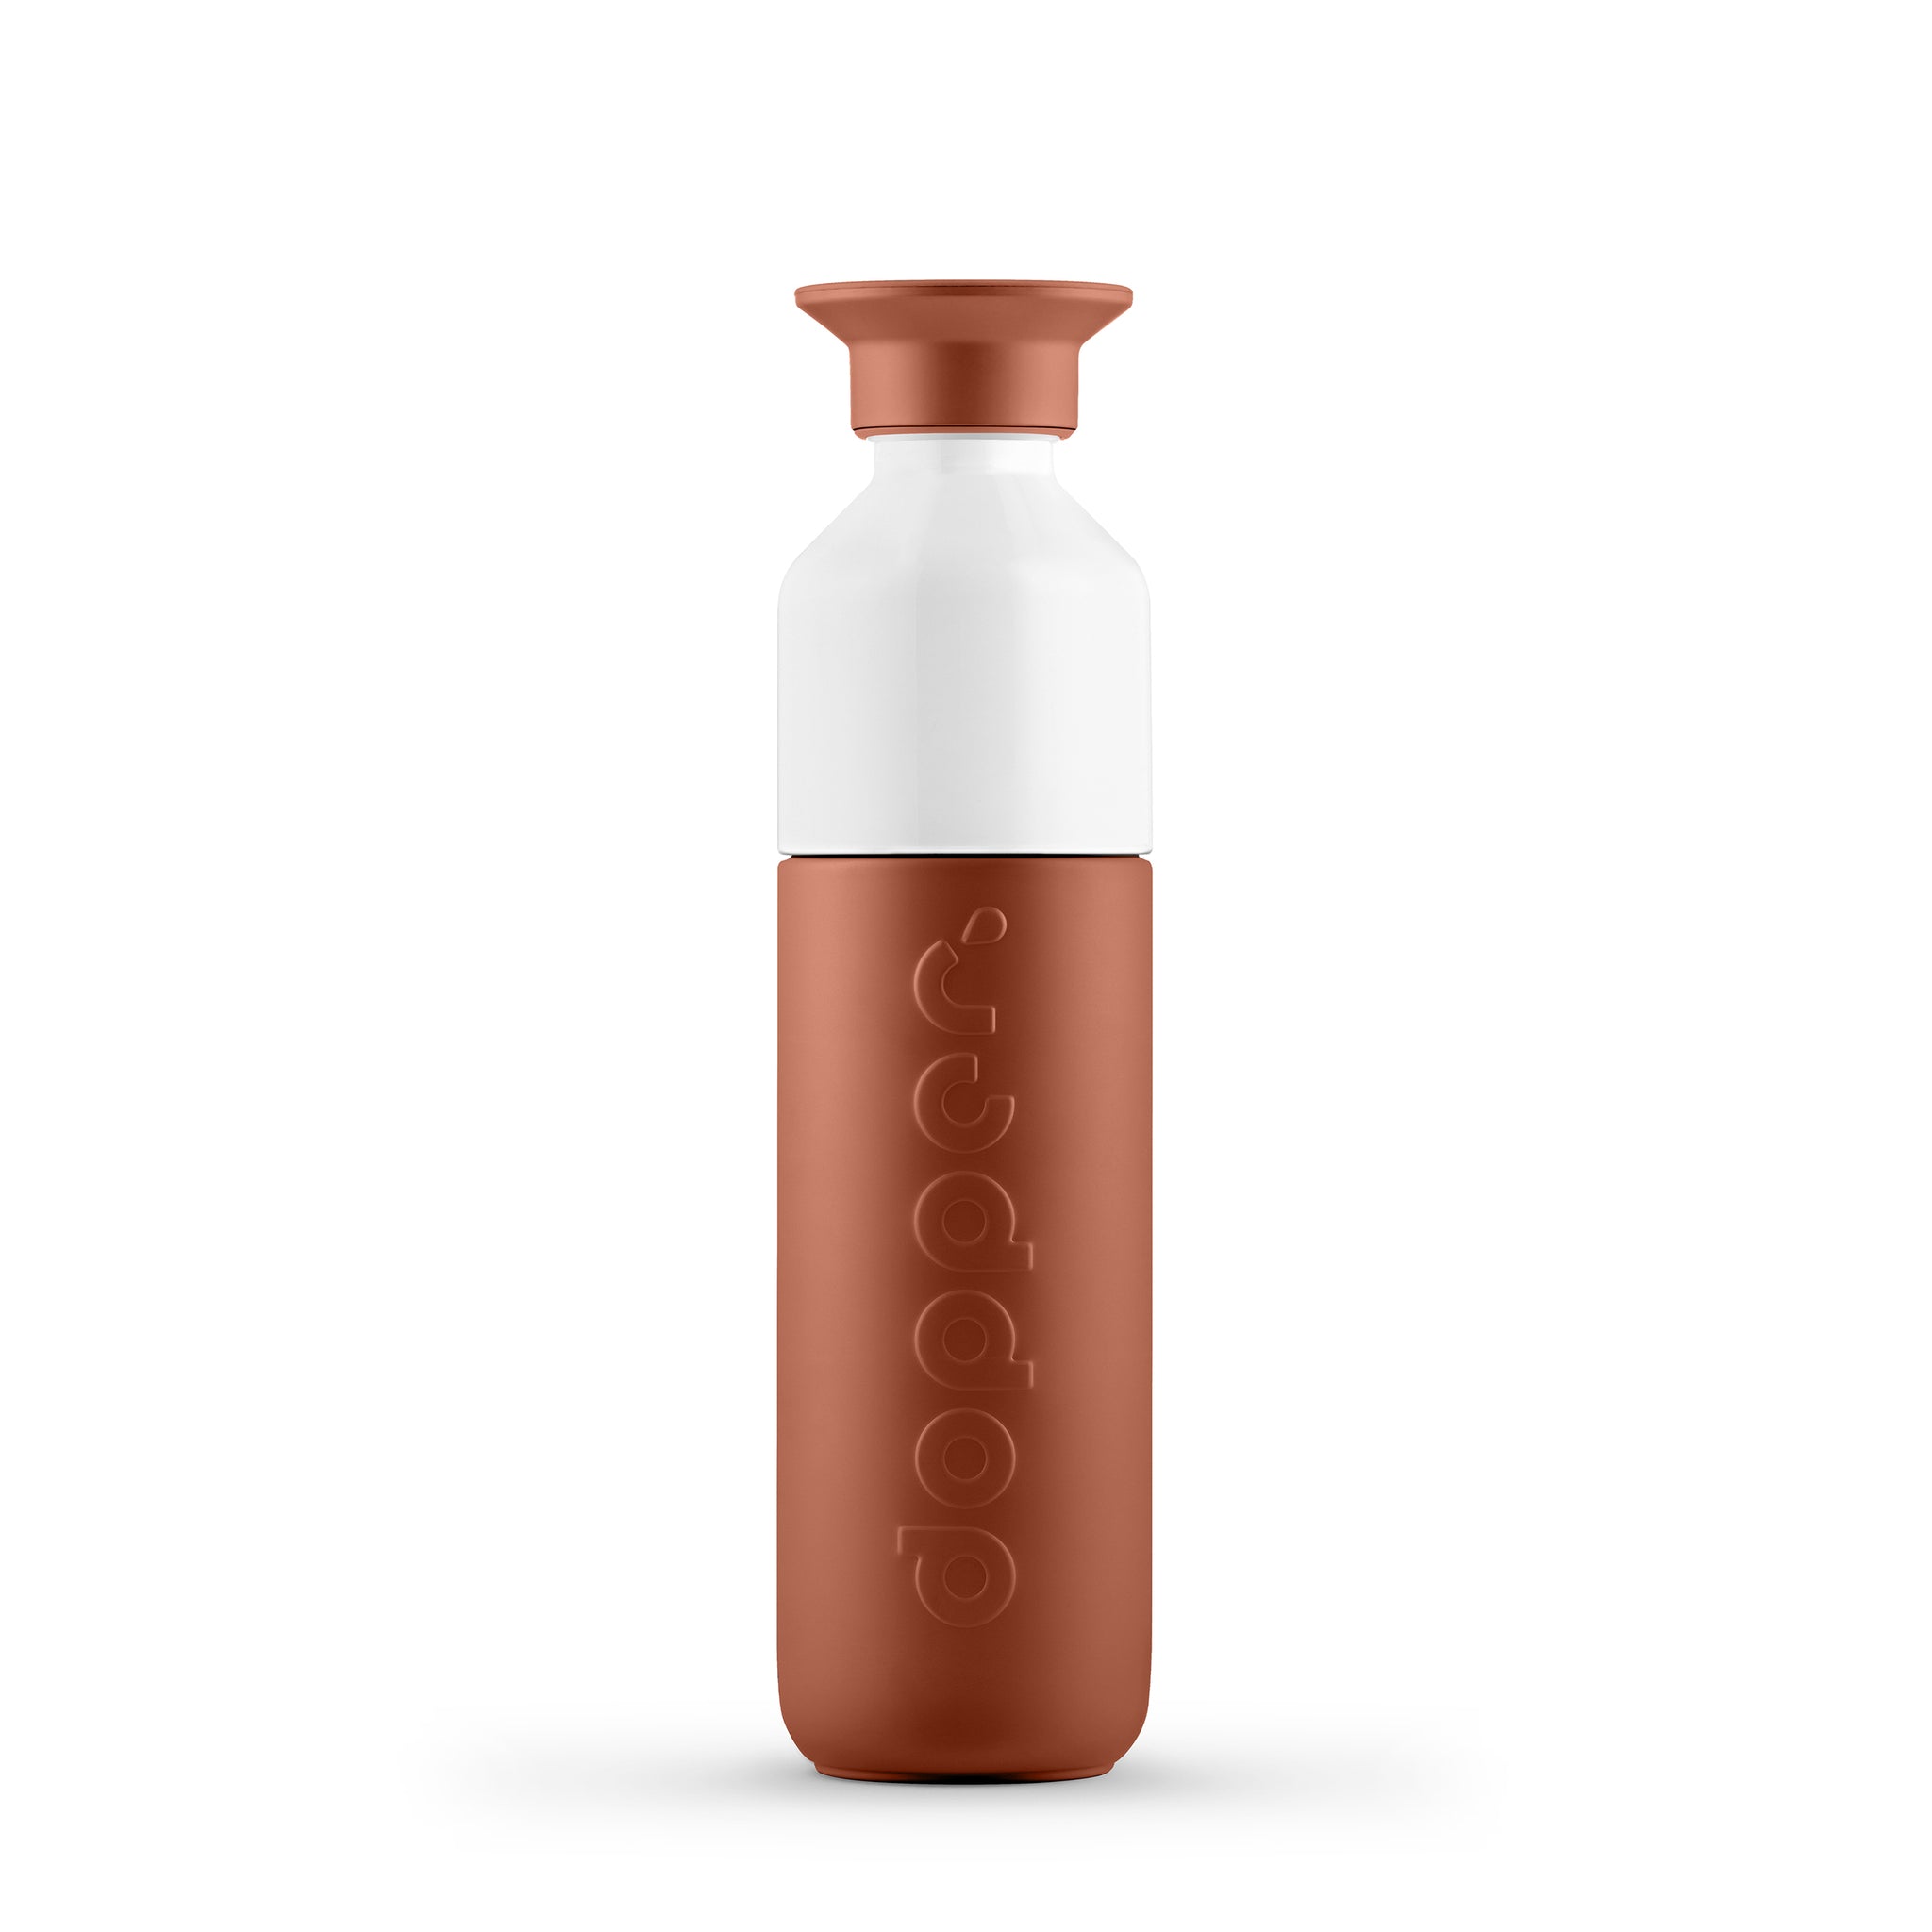 Dopper Insulated Small Terracotta Tide│Thermosfles 350ml Bruin│art. 3407│voorkant met witte achtergrond